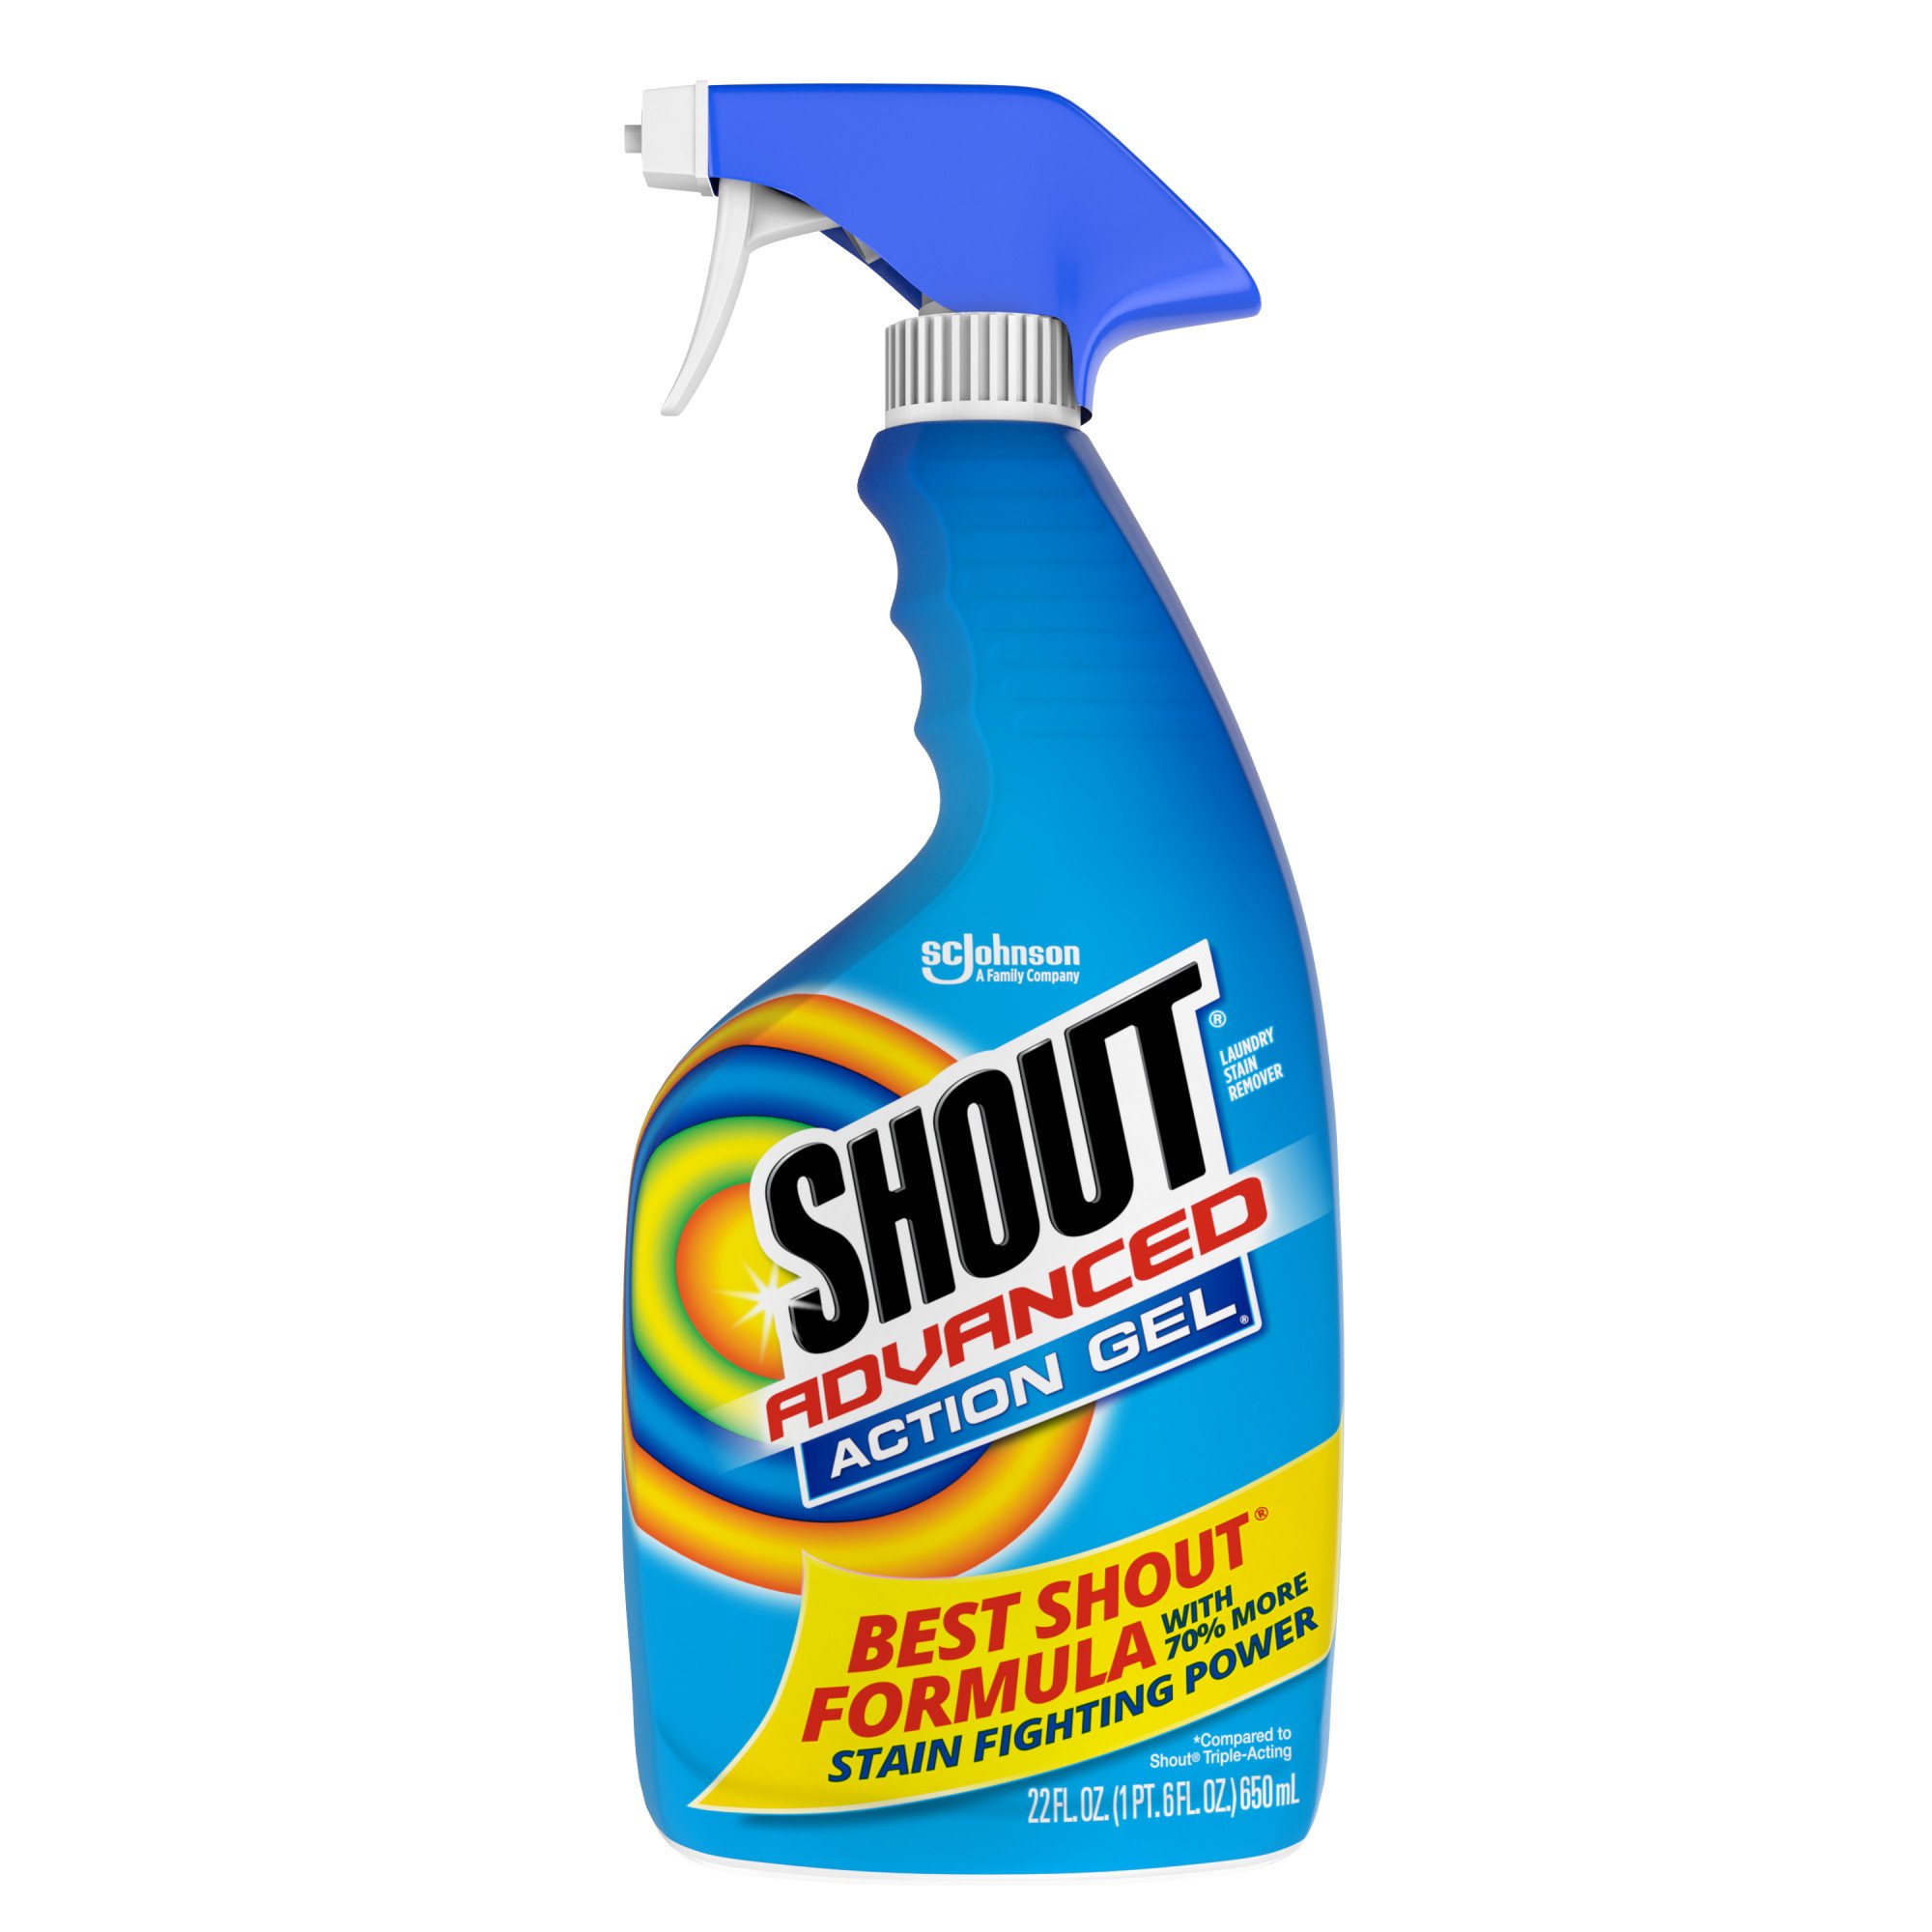 Shout Advanced Action Gel, Laundry Stain Remover (22 fl oz Spray Bottle)  46500723872